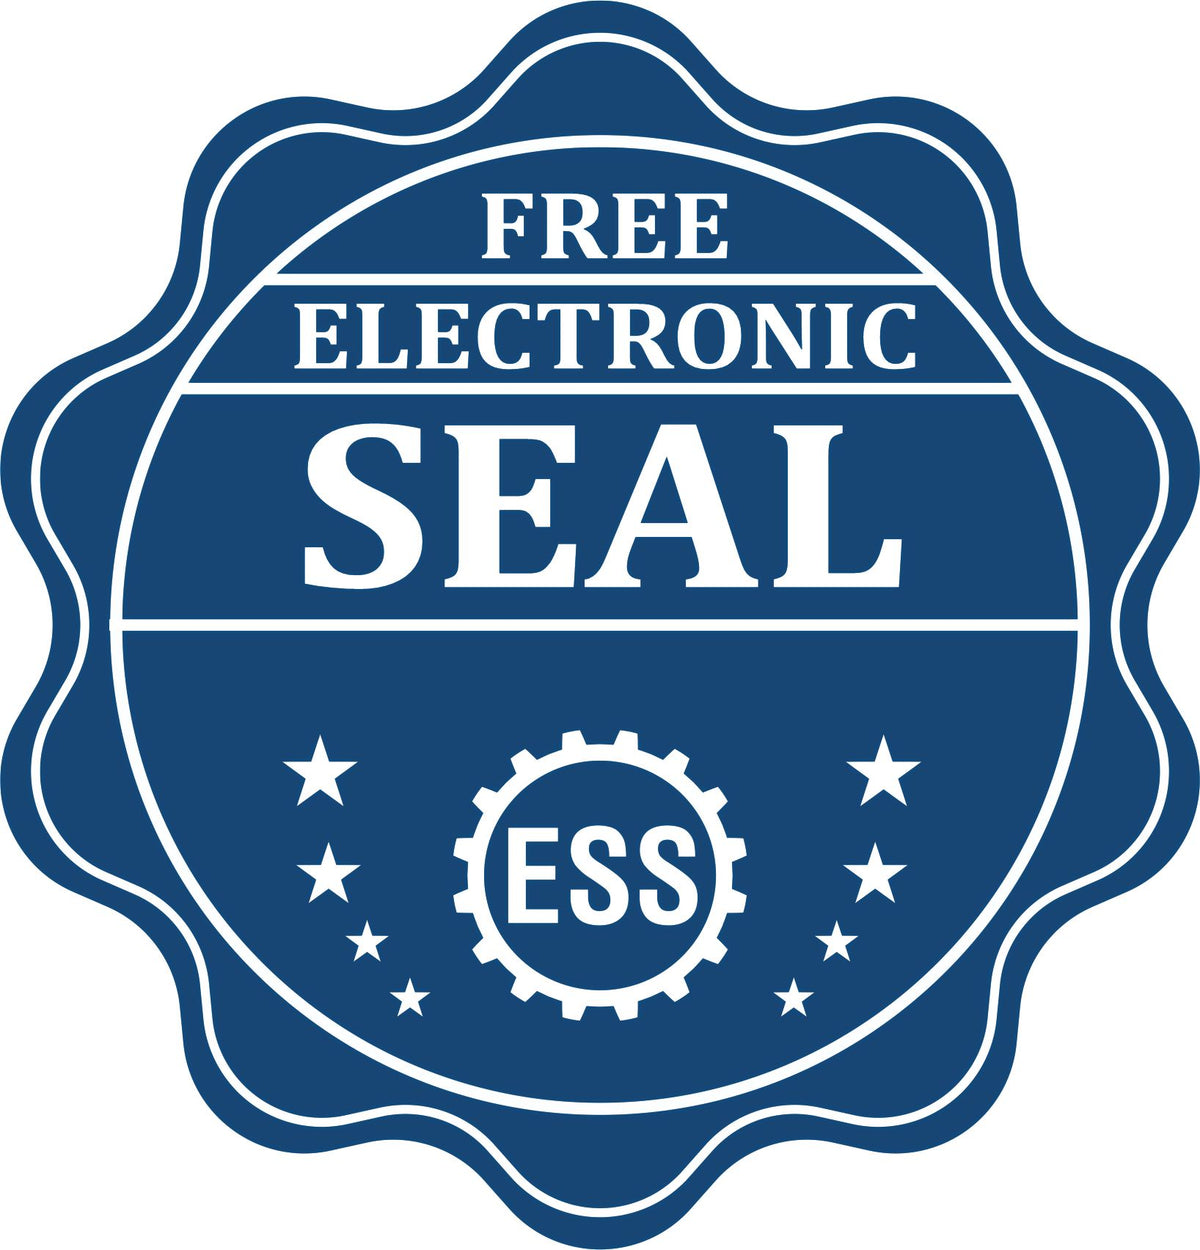 A badge showing a free electronic seal for the Hybrid Arizona Land Surveyor Seal with stars and the ESS gear on the emblem.